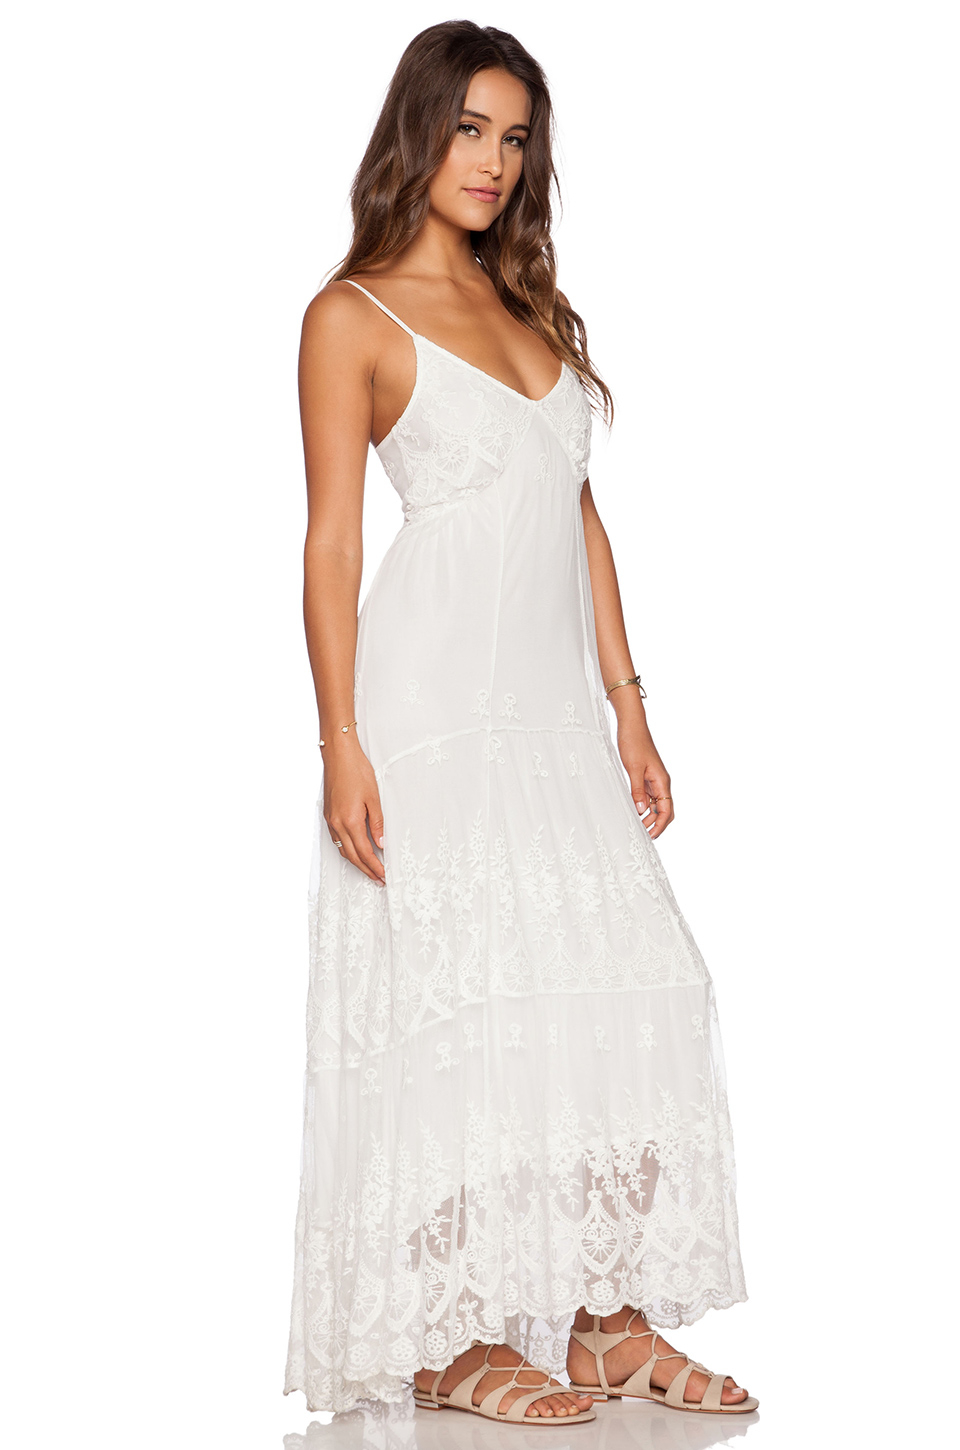 Lyst - Spell & The Gypsy Collective Ophelia Maxi Dress in White